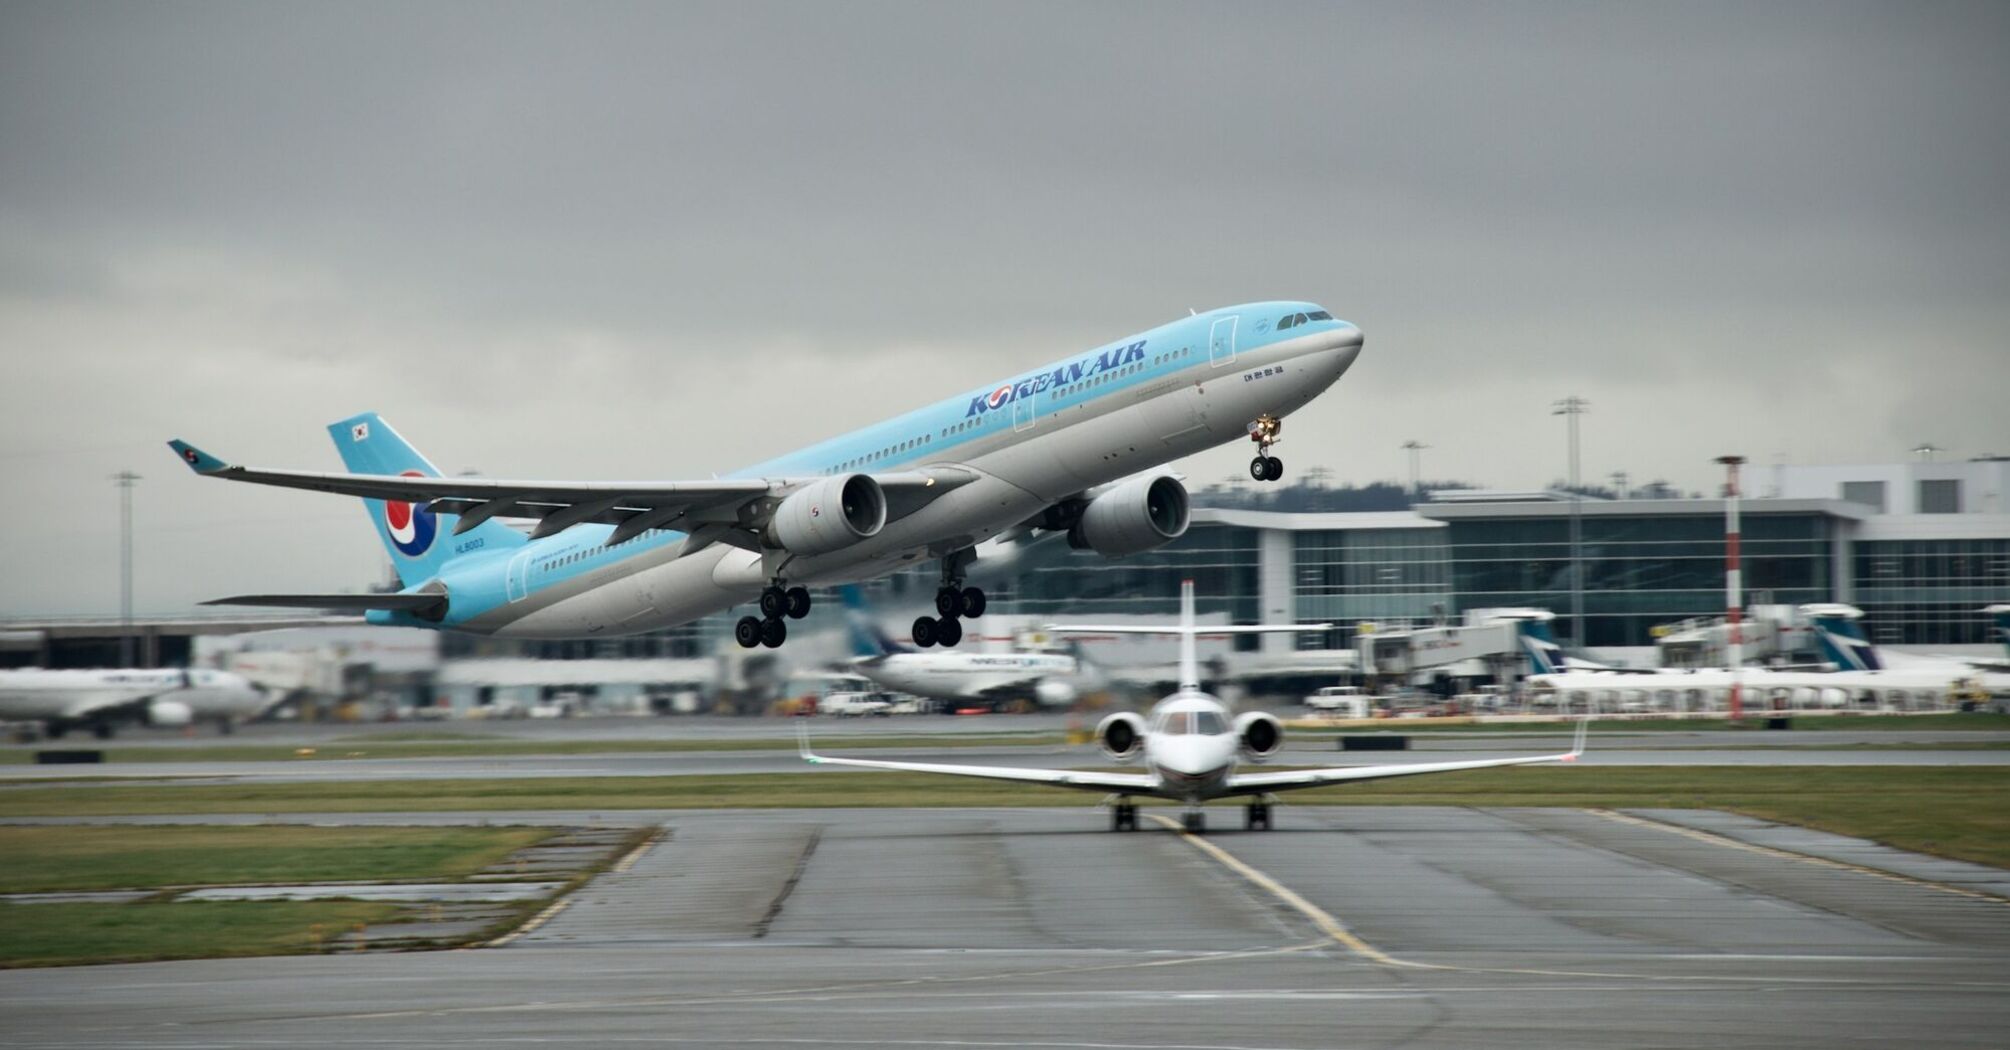 Korean Air plane taking off from an airport, cloudy background